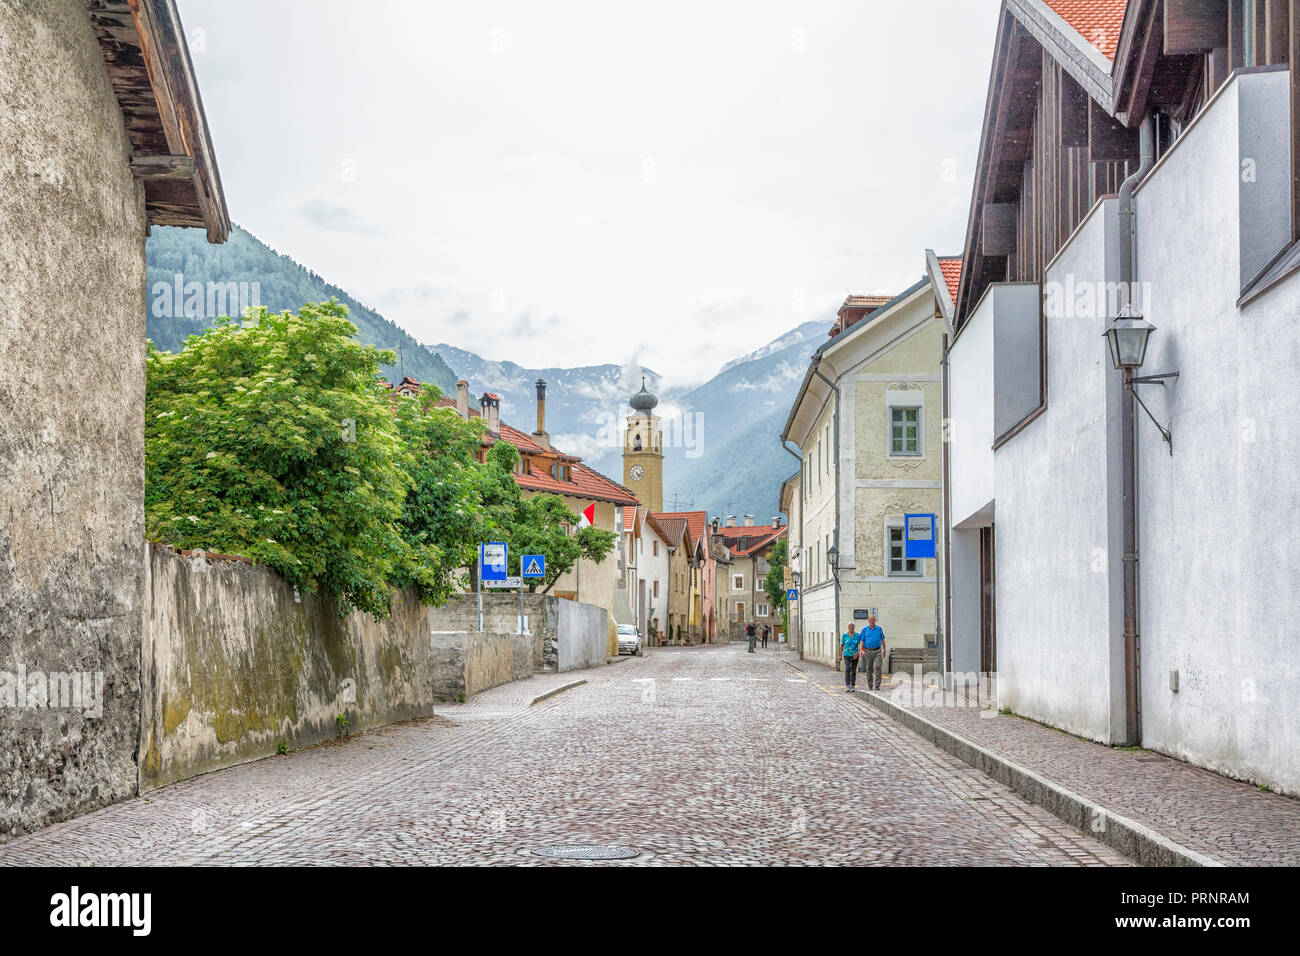 The historic town of Glorenza/Glurns in the south of Malles/Mals is one of the smallest cities in the world. Trentino Alto Adige/South Tyrol - Italy Stock Photo